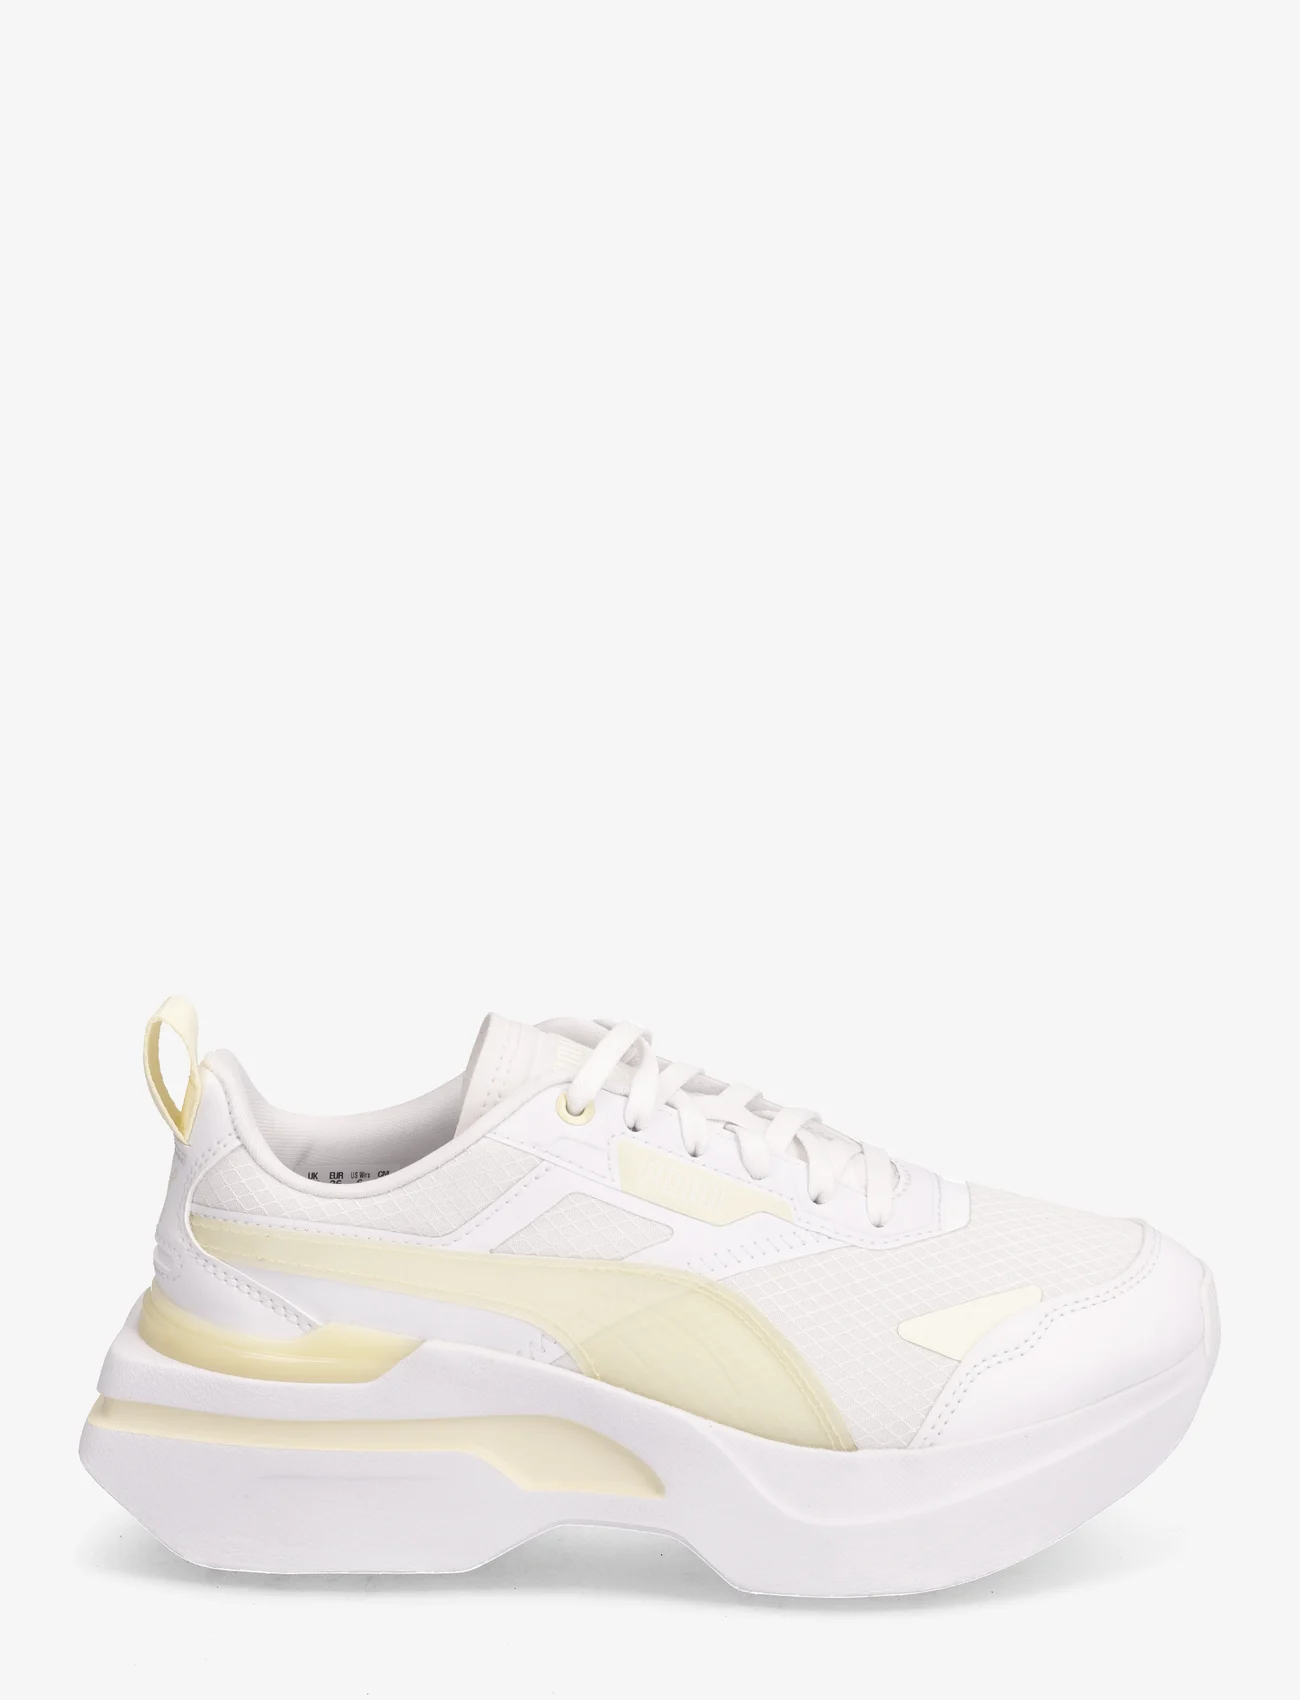 PUMA - Kosmo Rider Tech Wns - sneakers med lavt skaft - puma white-anise flower - 1